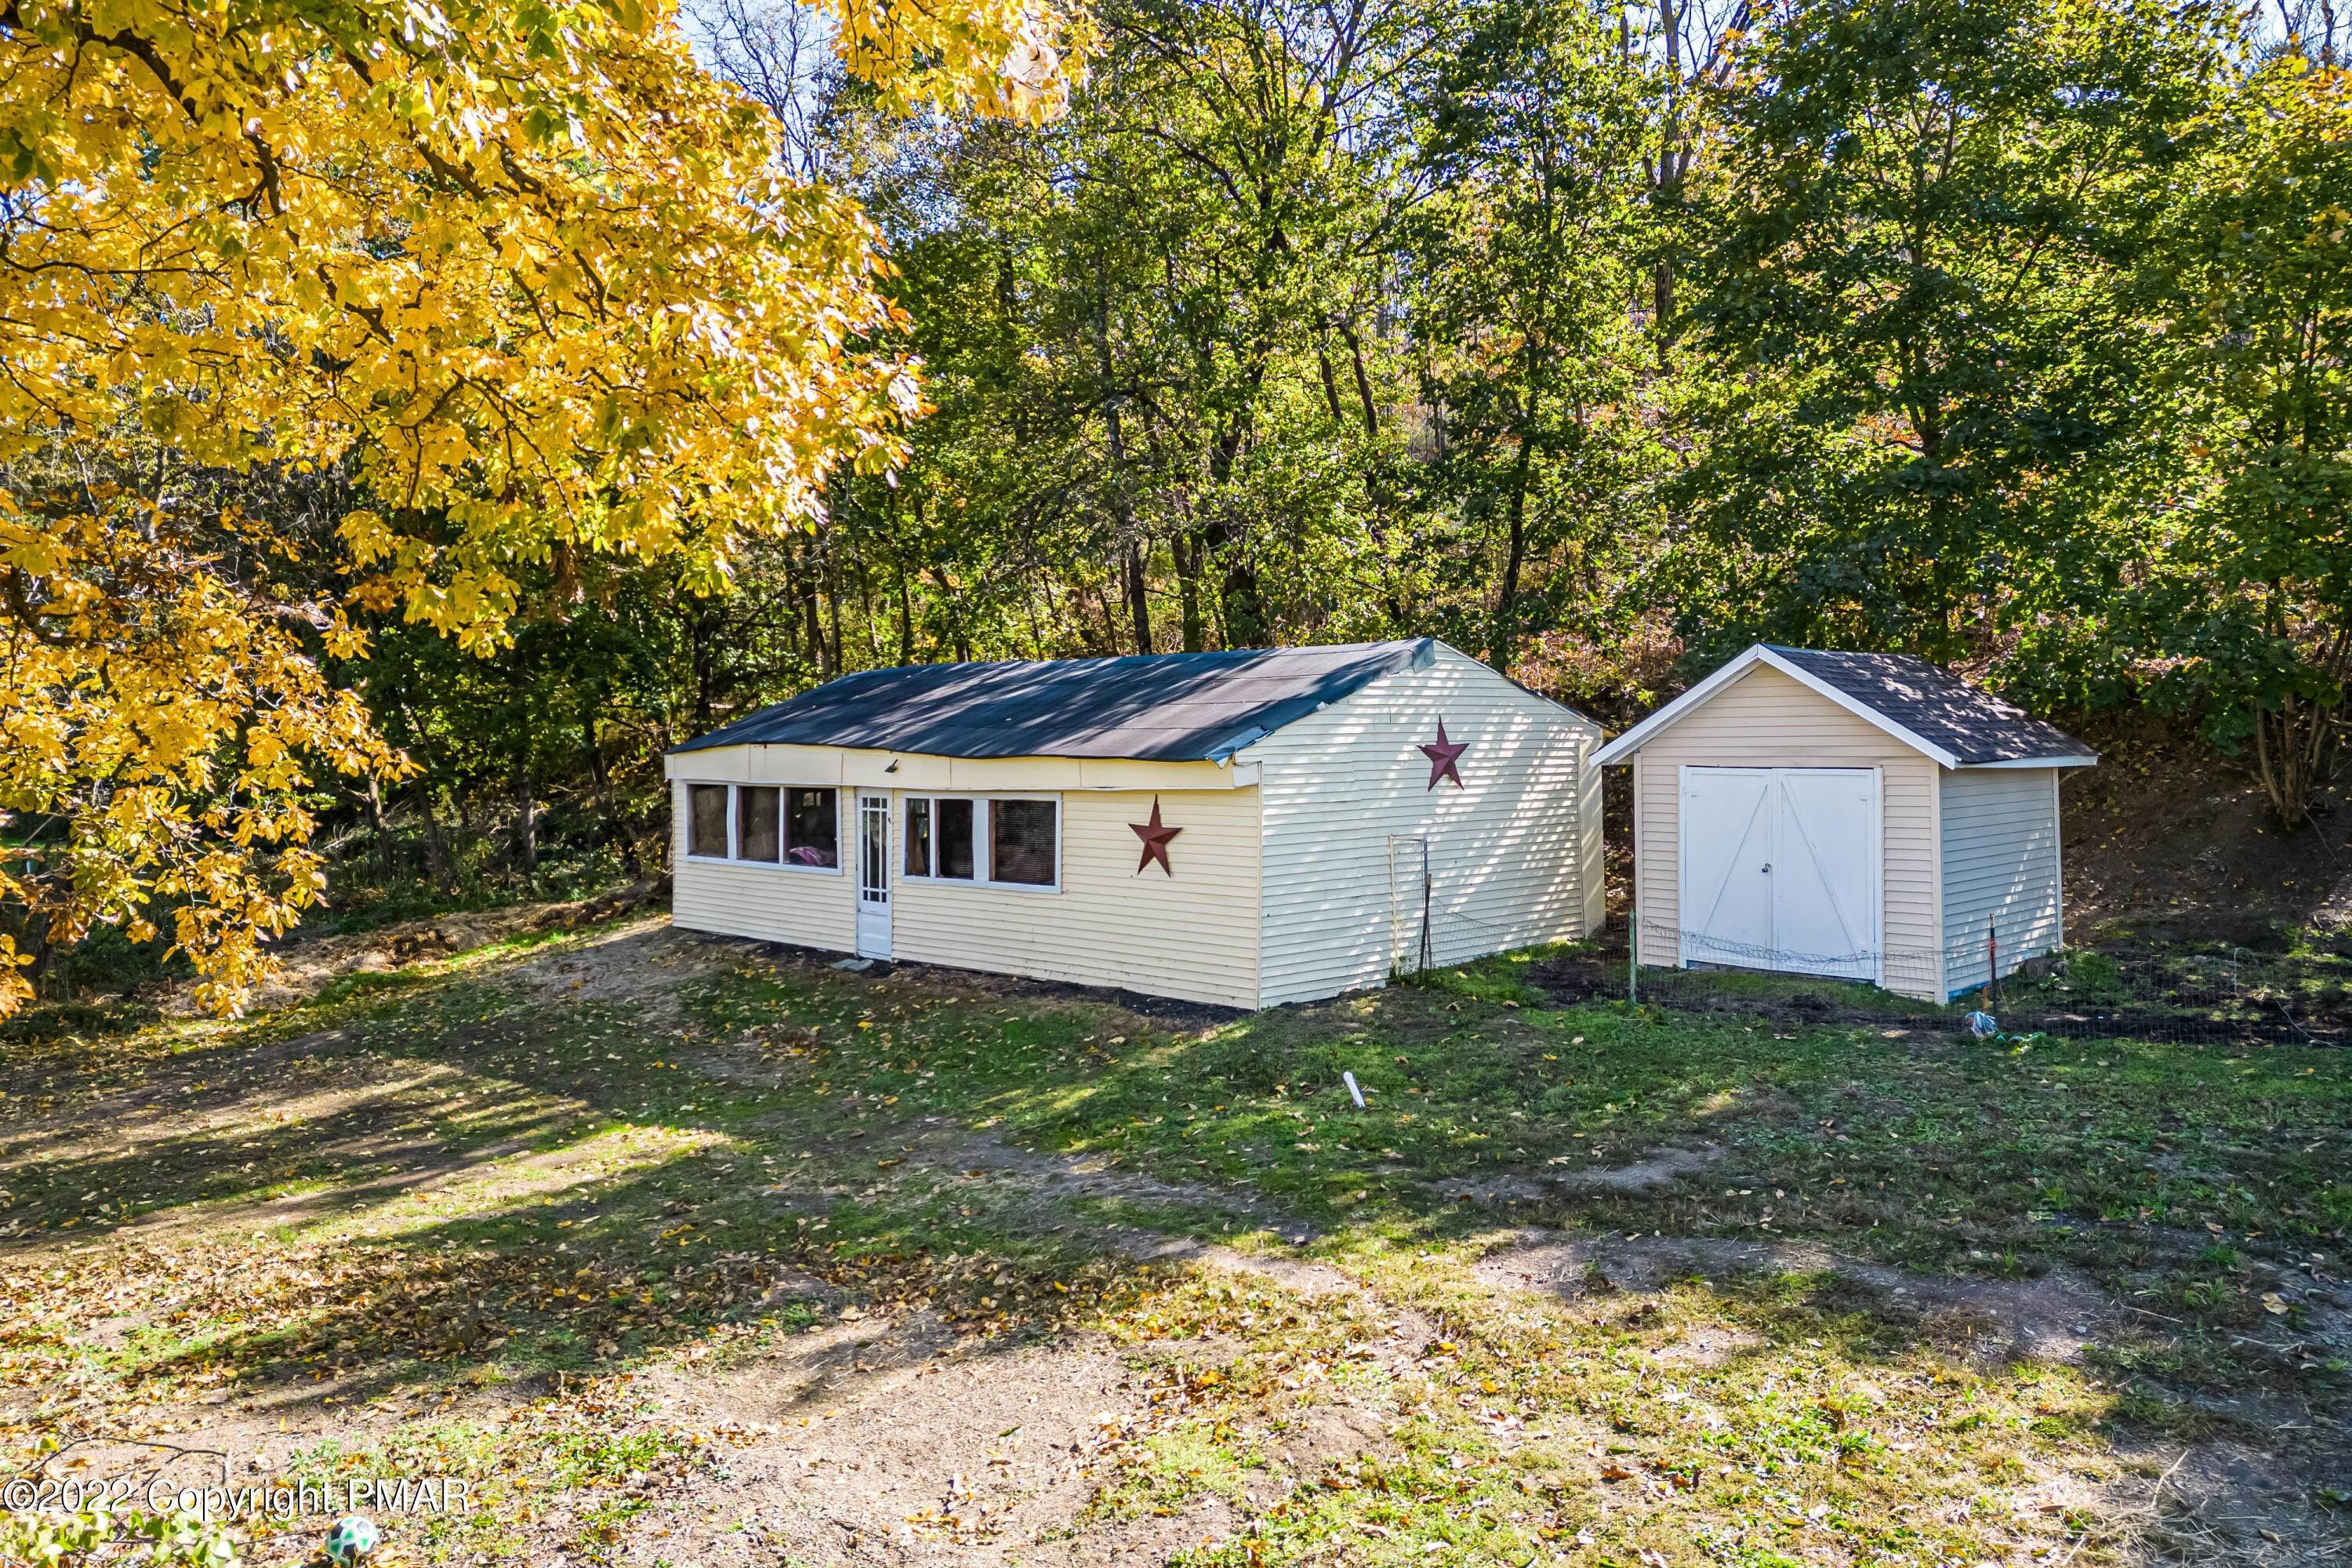 35. Farm and Ranch Properties for Sale at 891 Oak Grove Dr Lehighton, Pennsylvania 18235 United States